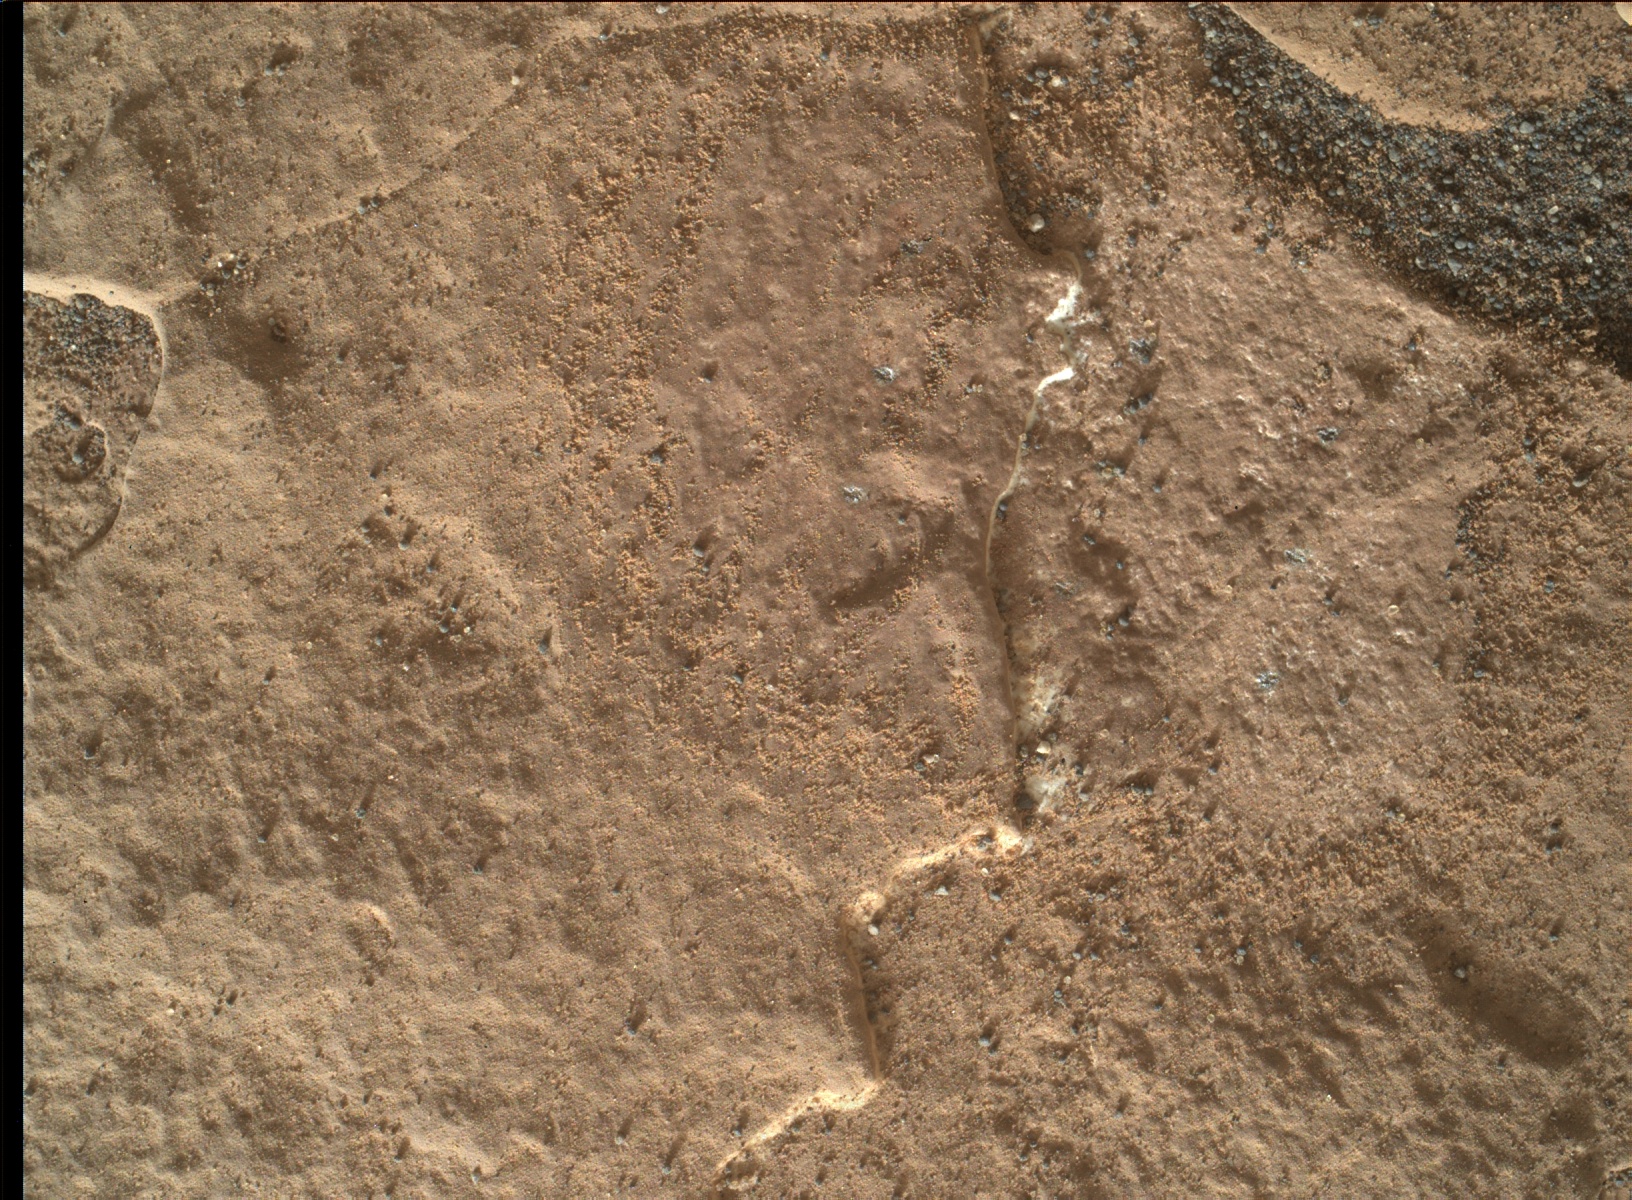 Nasa's Mars rover Curiosity acquired this image using its Mars Hand Lens Imager (MAHLI) on Sol 1797